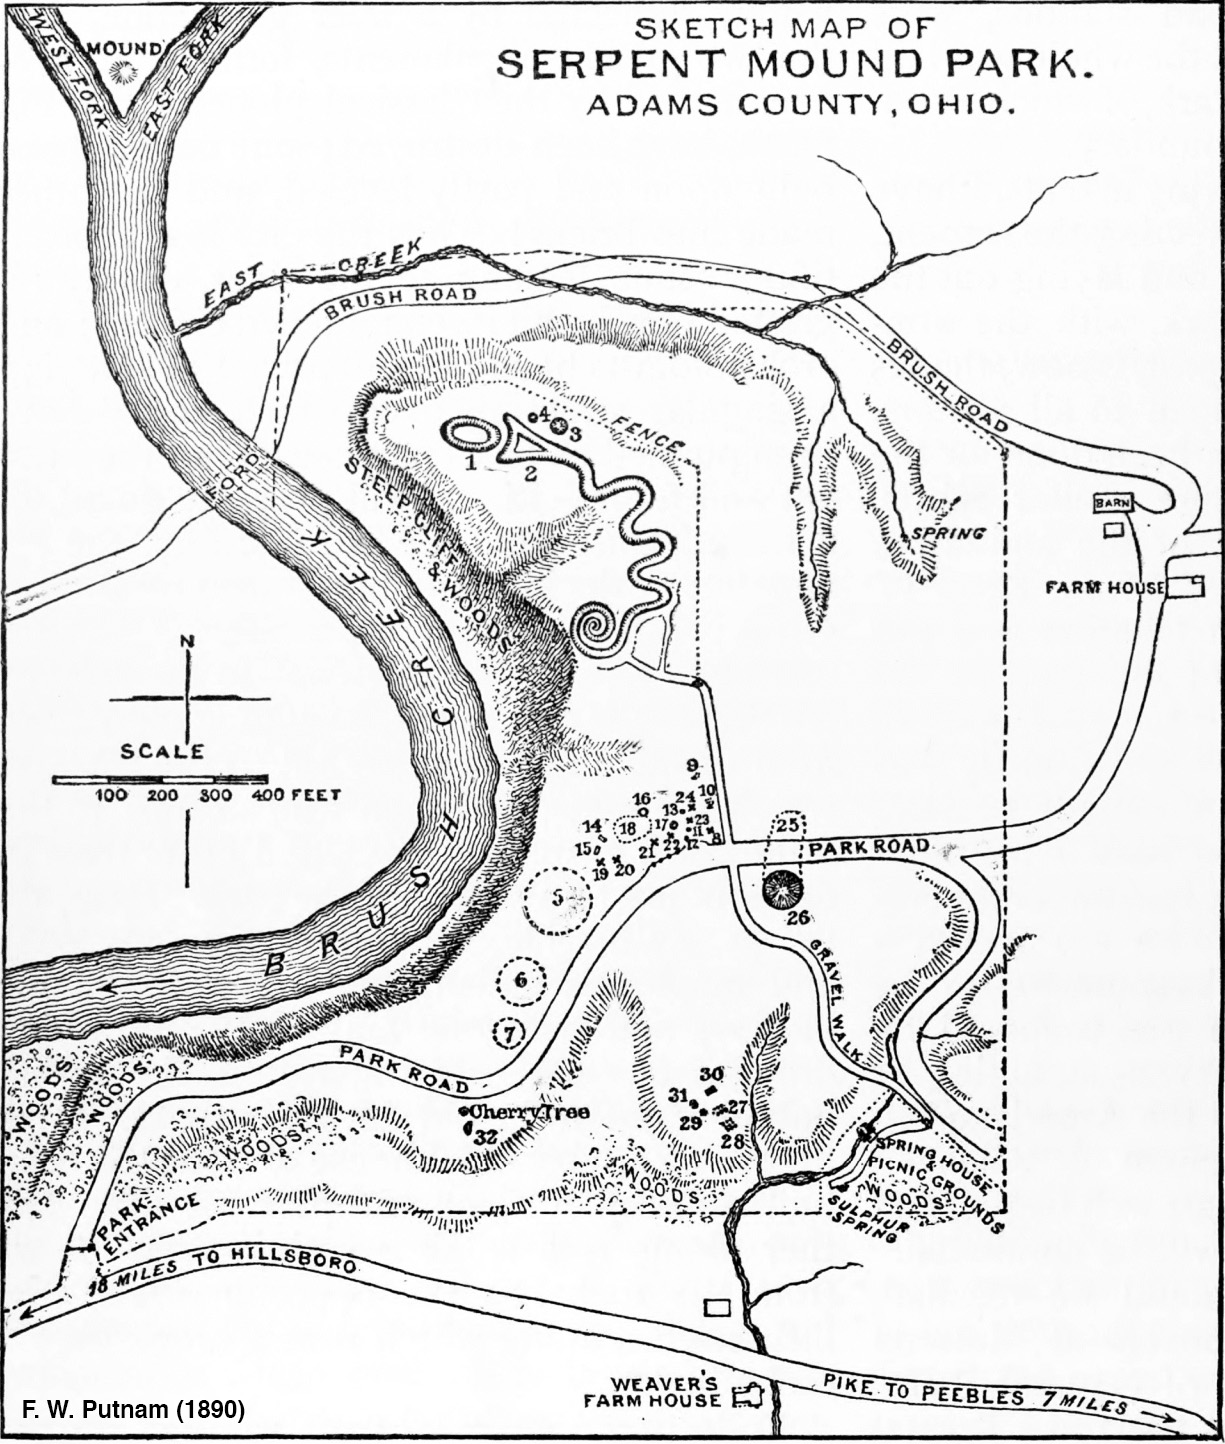 Historic black and white sketch map of Serpent Mound and other Indian mounds in the vicinity.